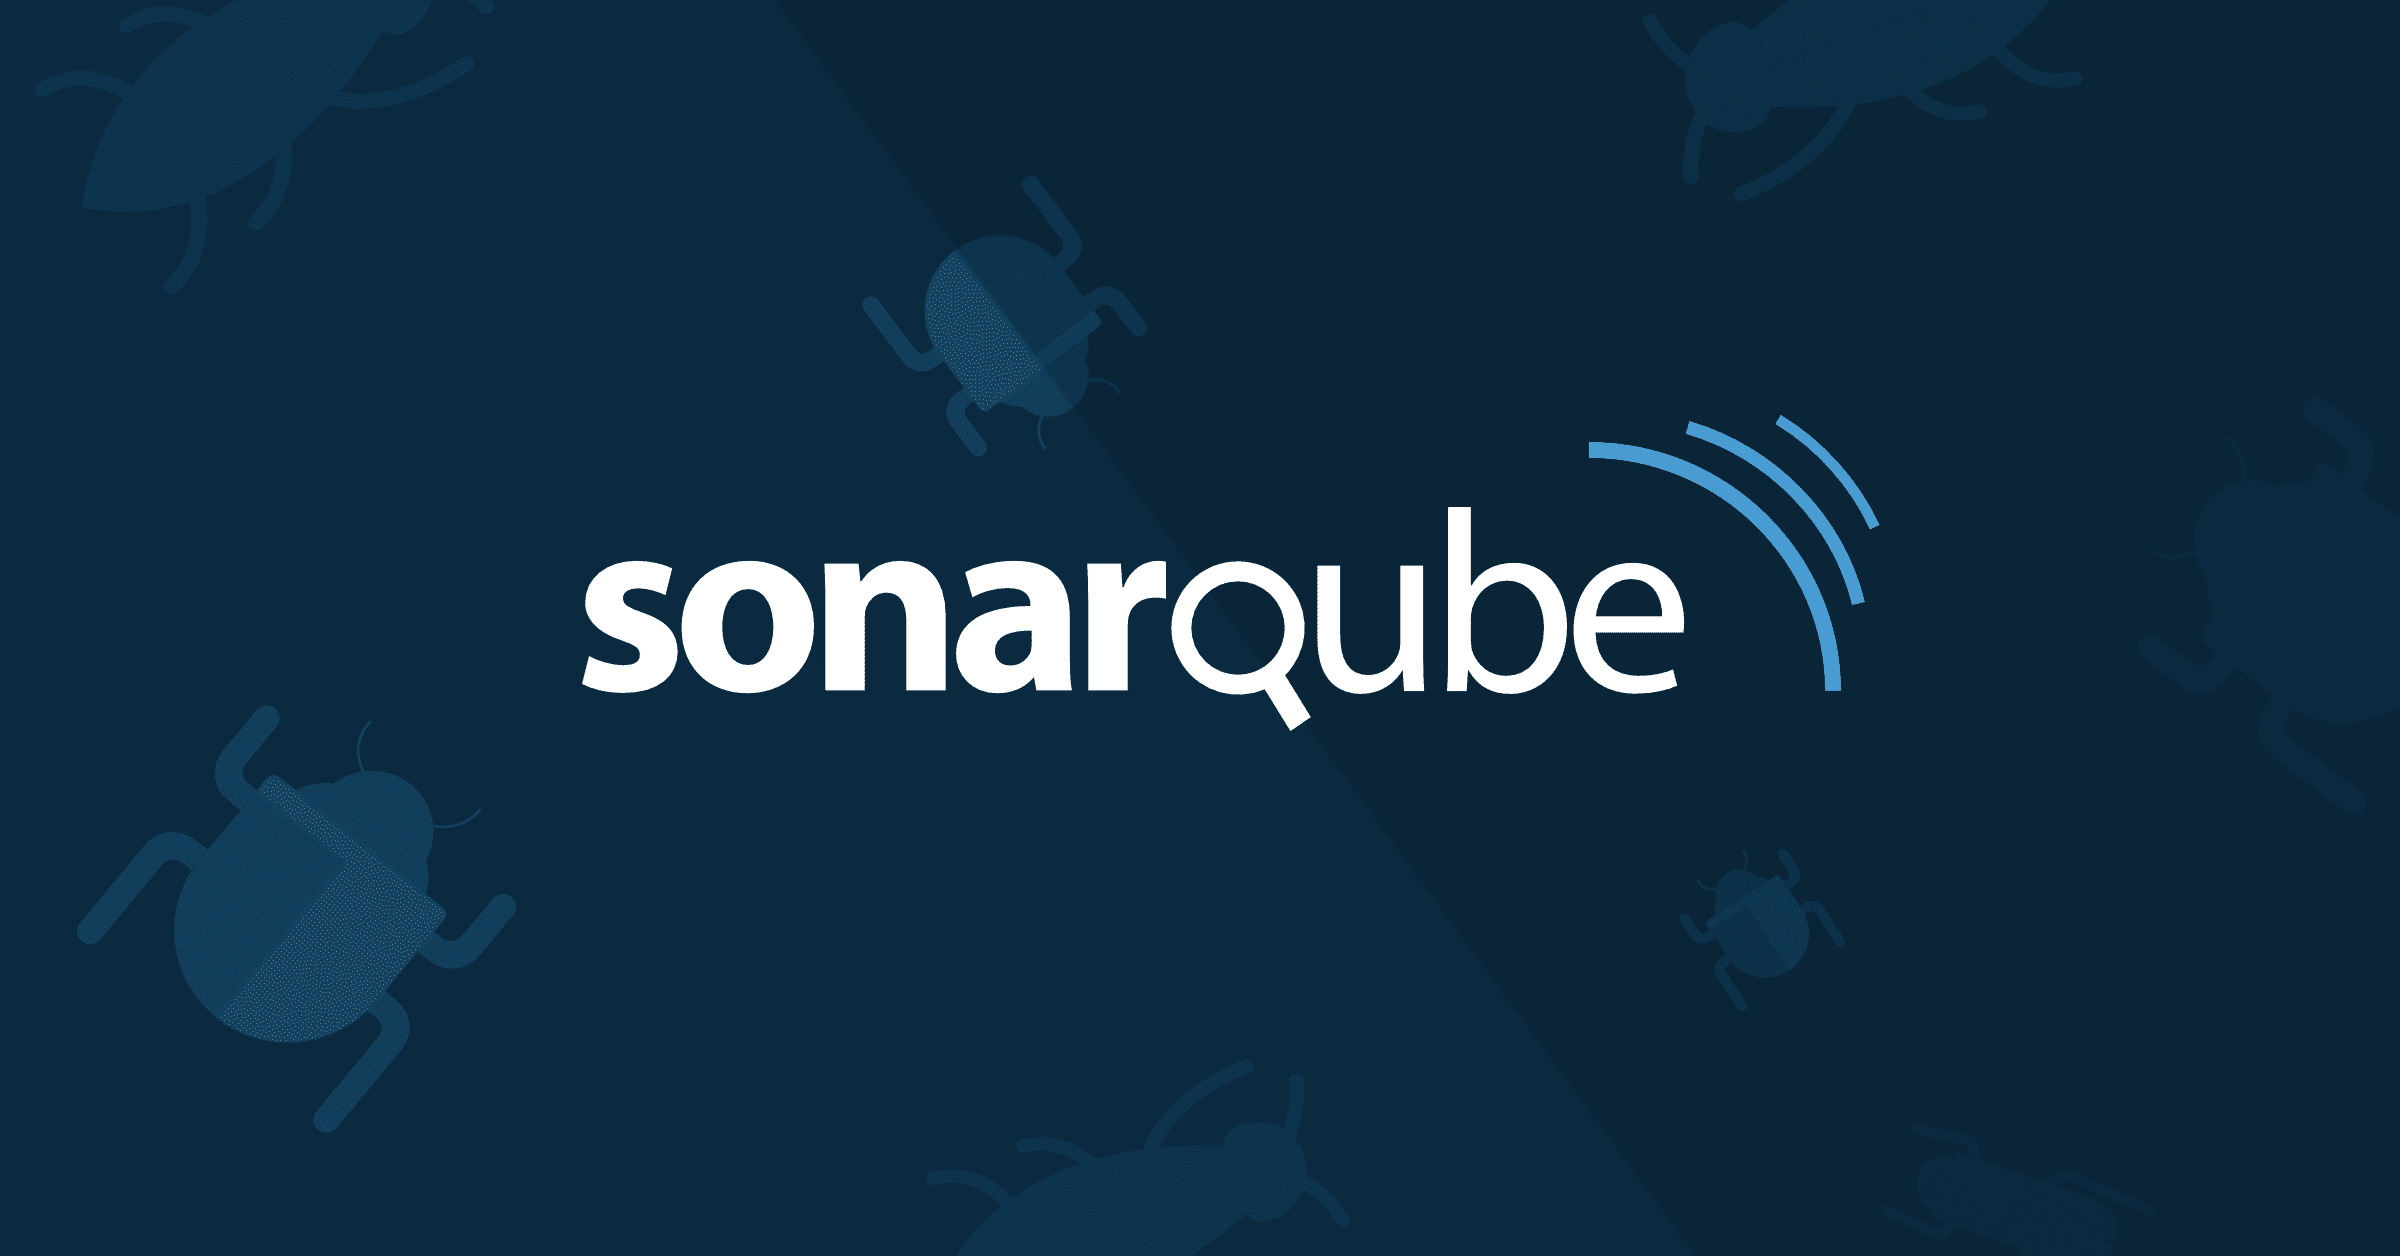 Is your code really that good? Let's check it with SonarQube